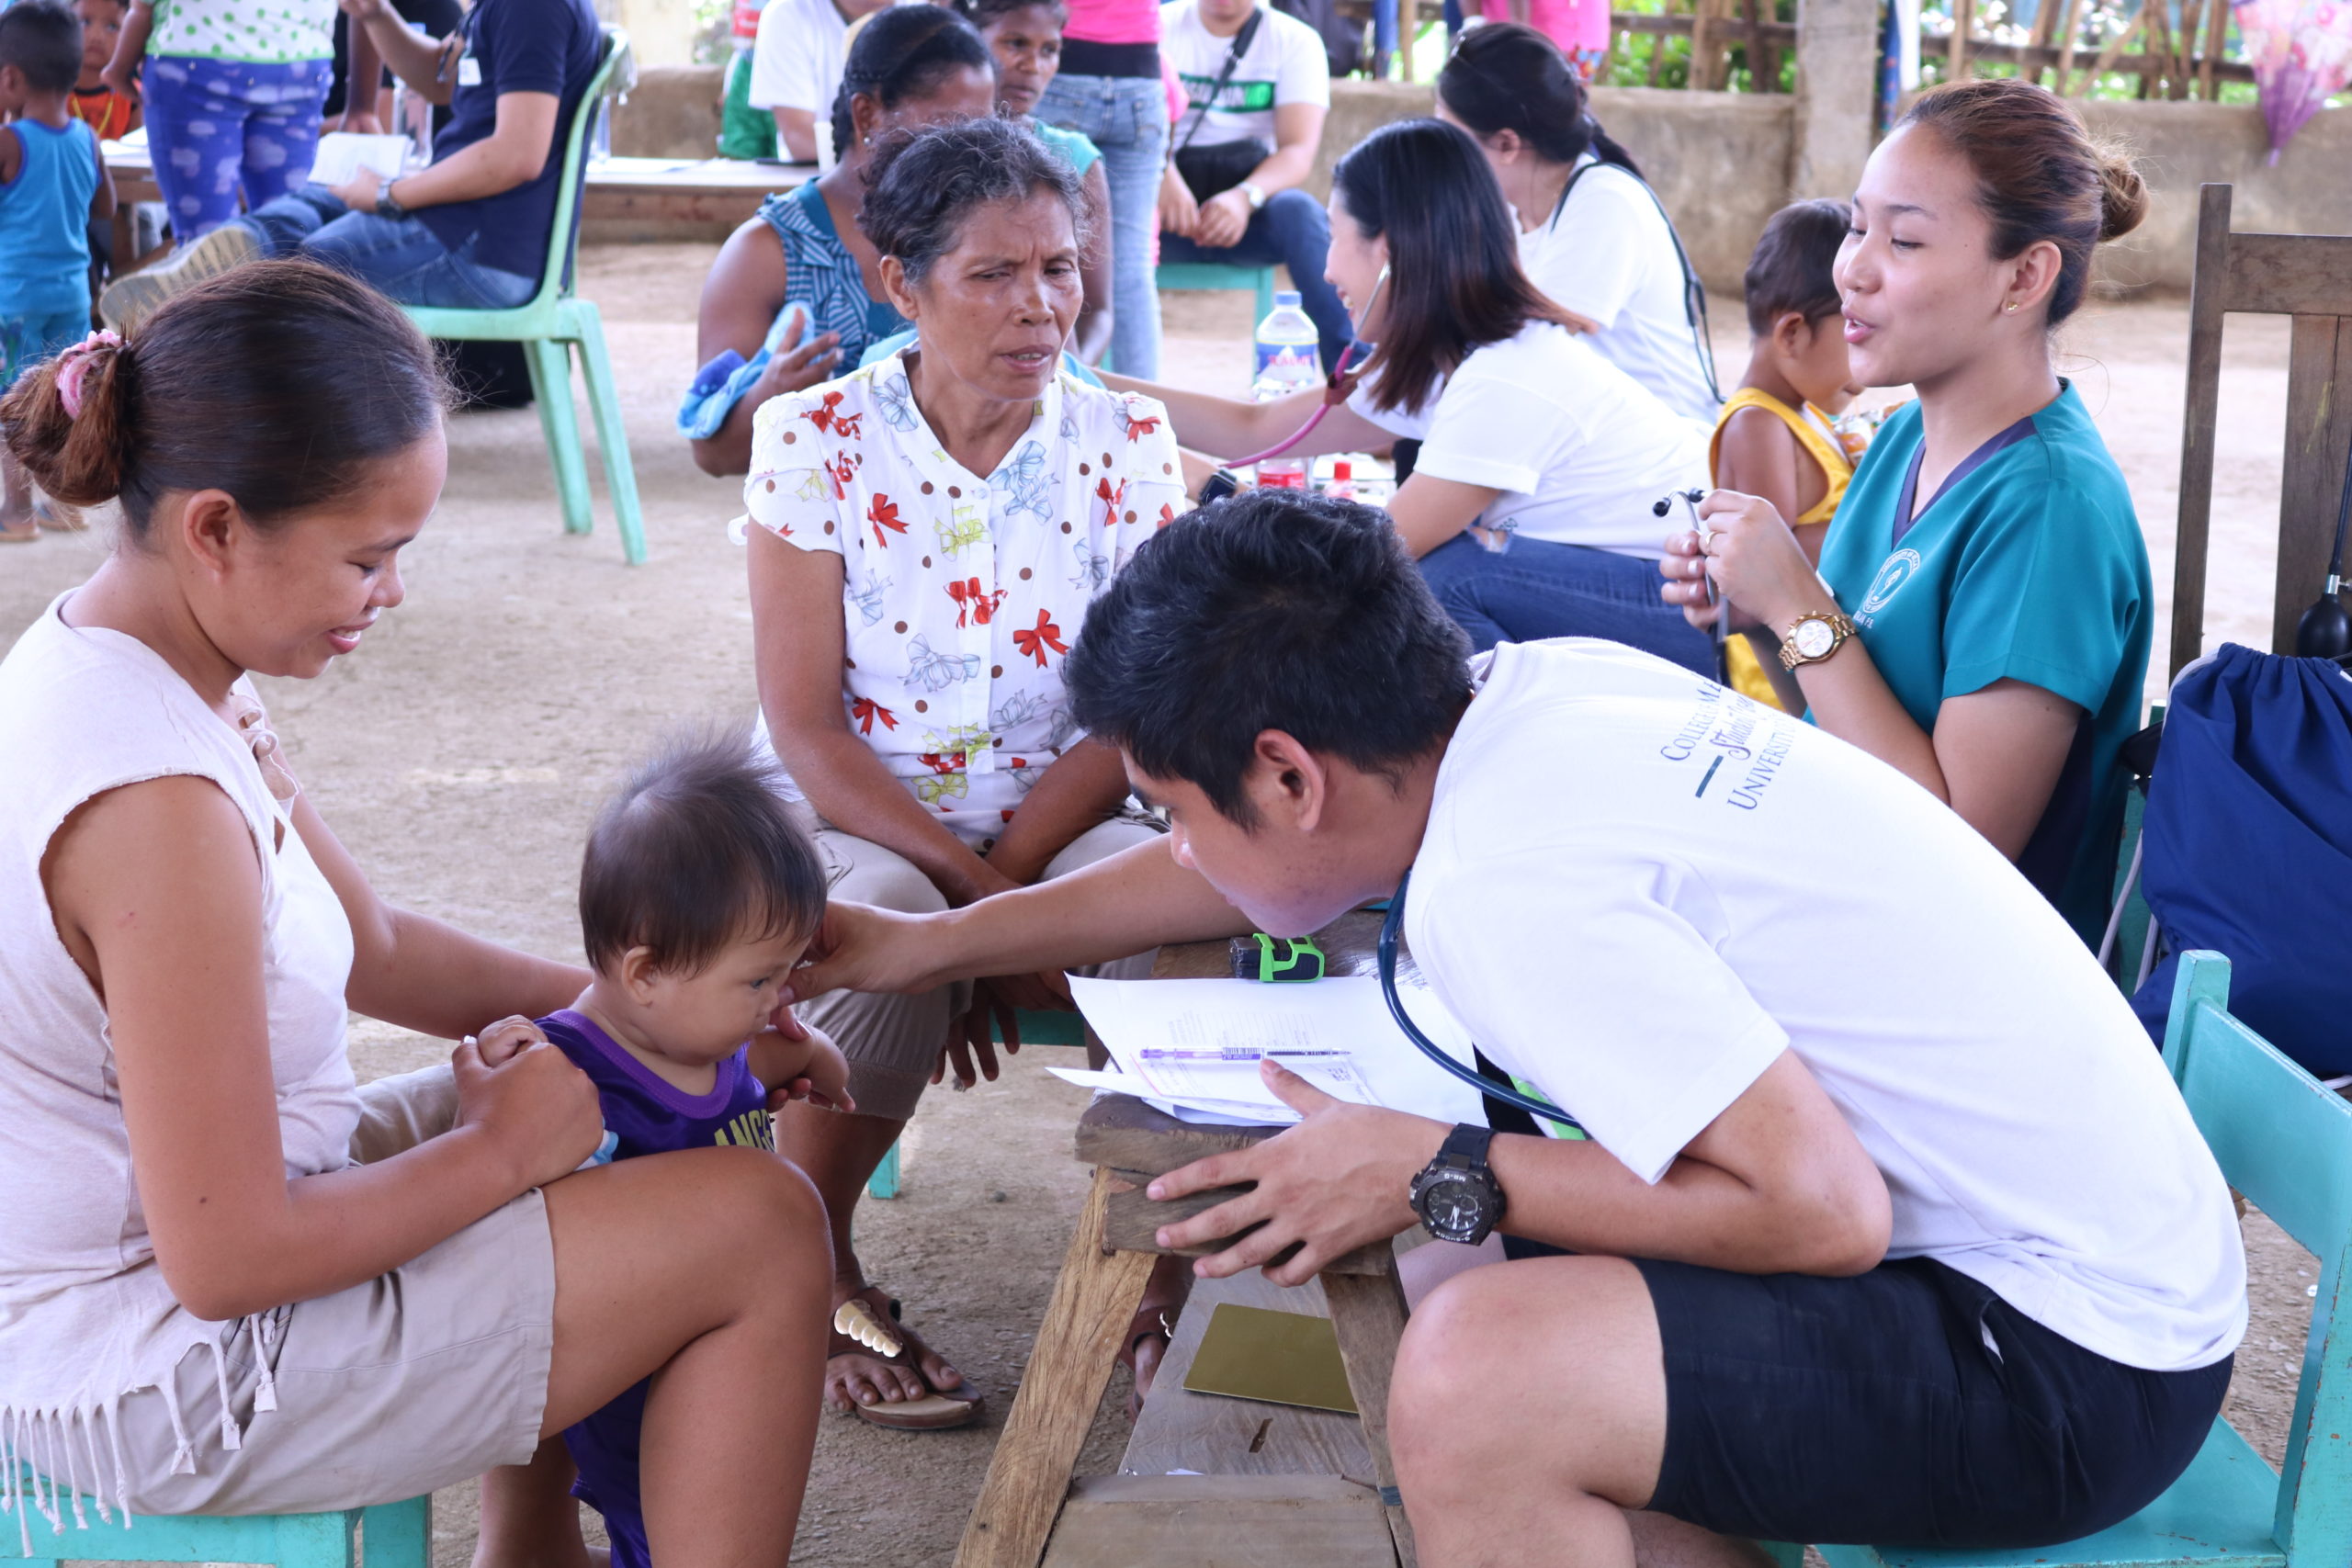 Negrosanon Young Leaders Institute - Medical Mission